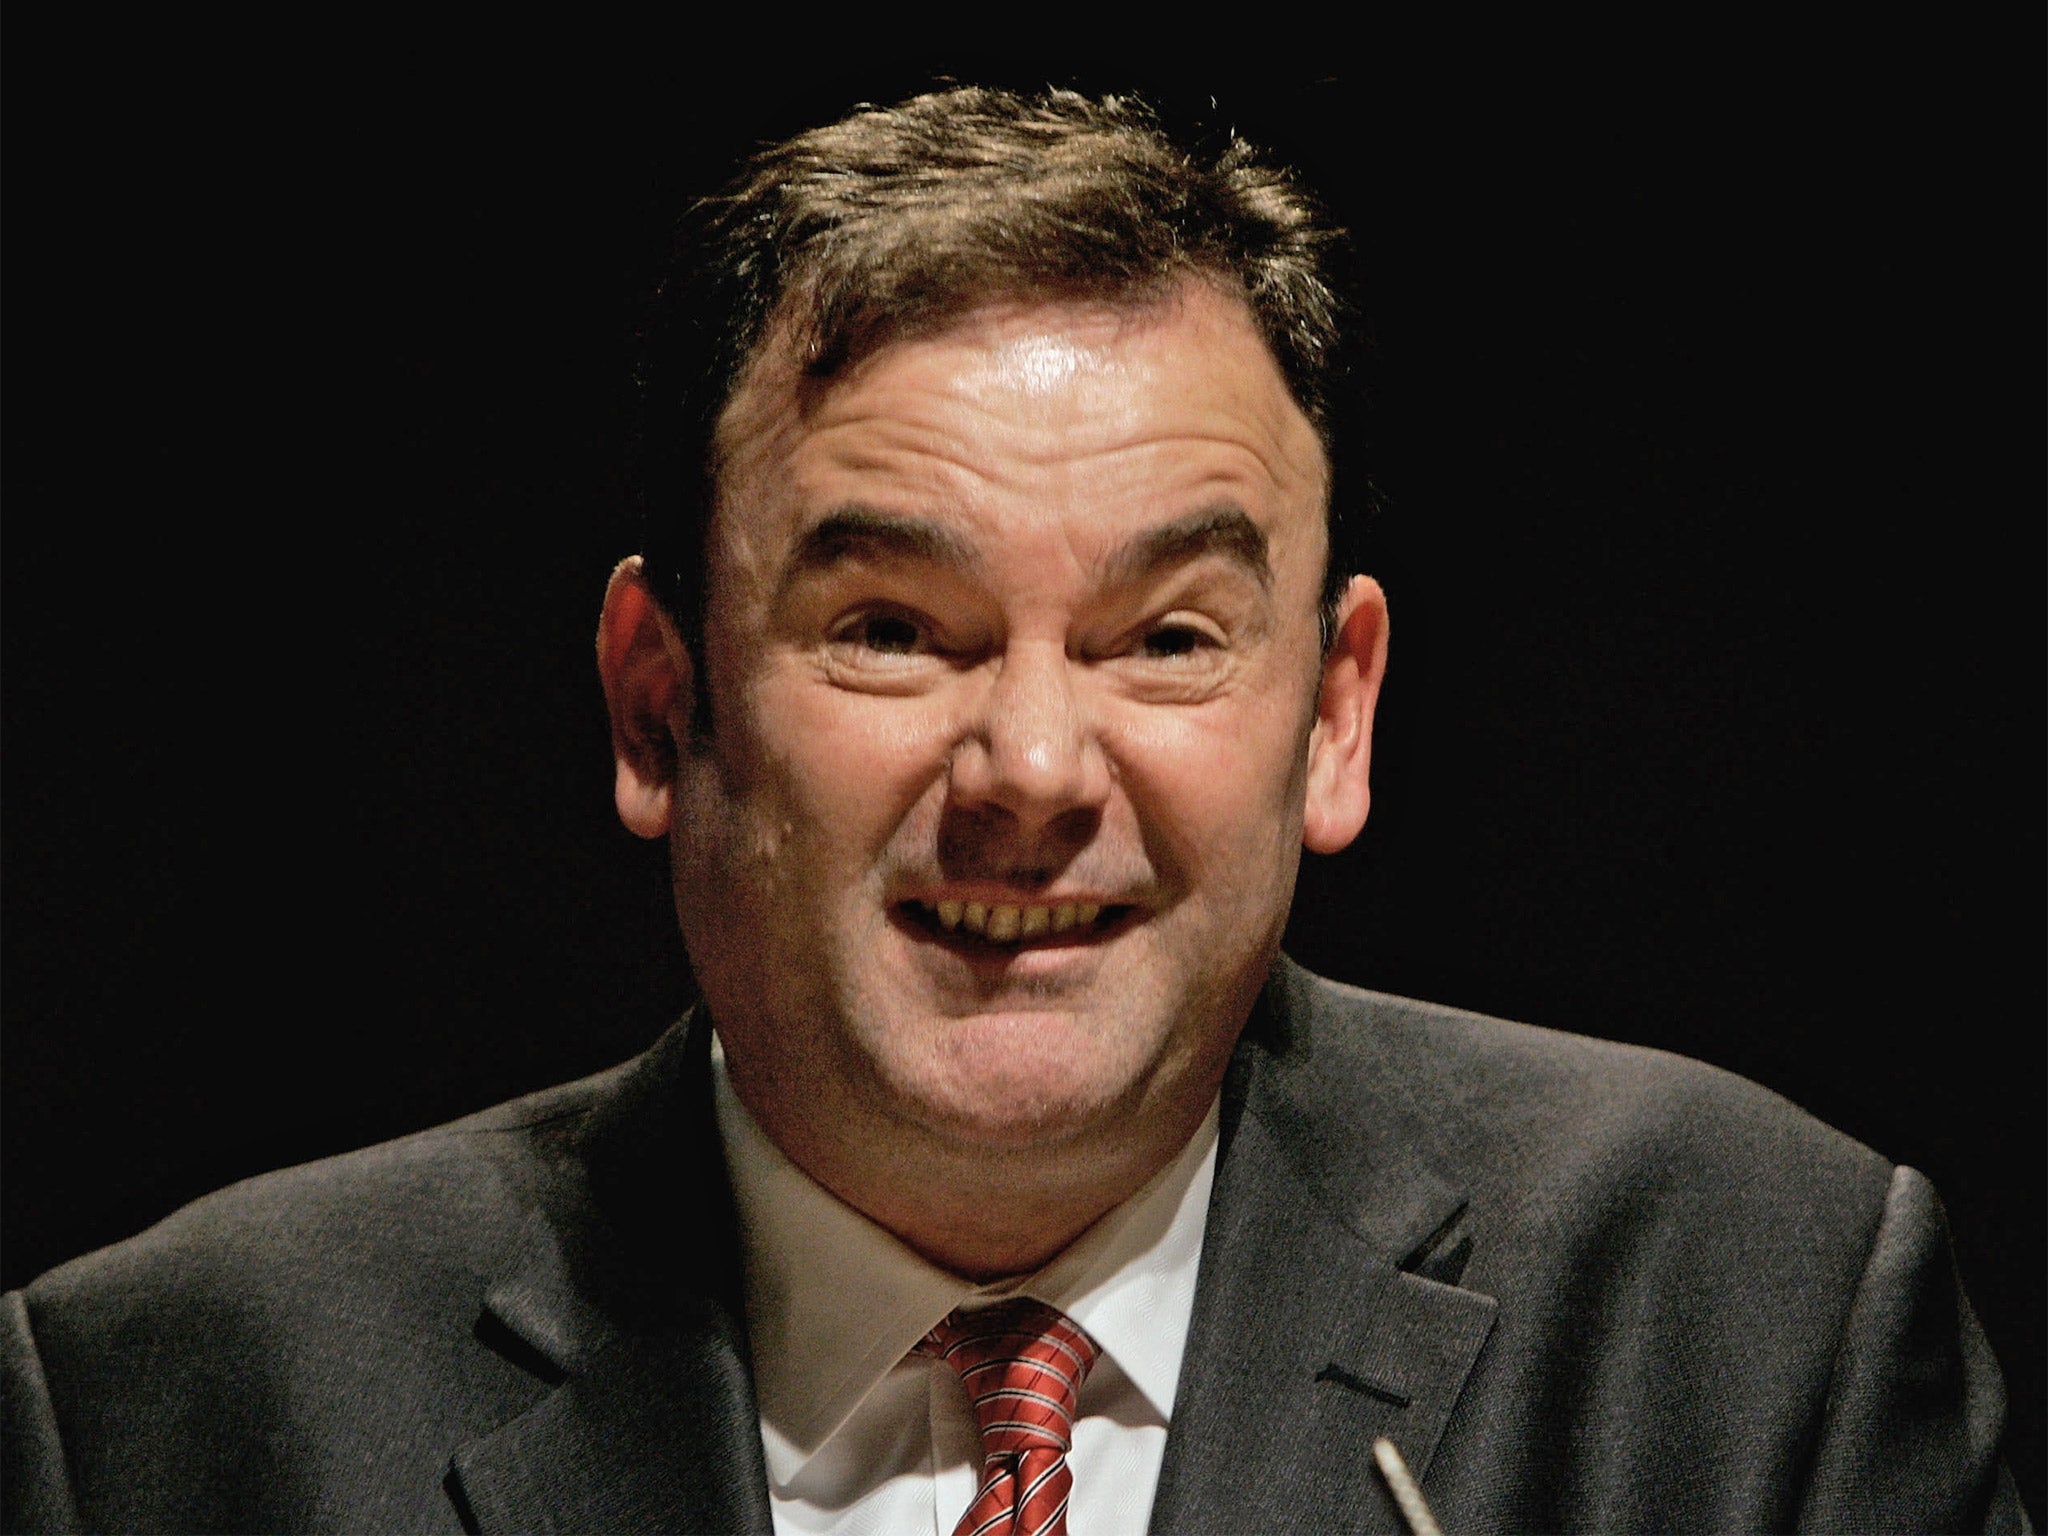 Jon Cruddas MP says the Labour party seemed to have 'lost everwhere to everyone'